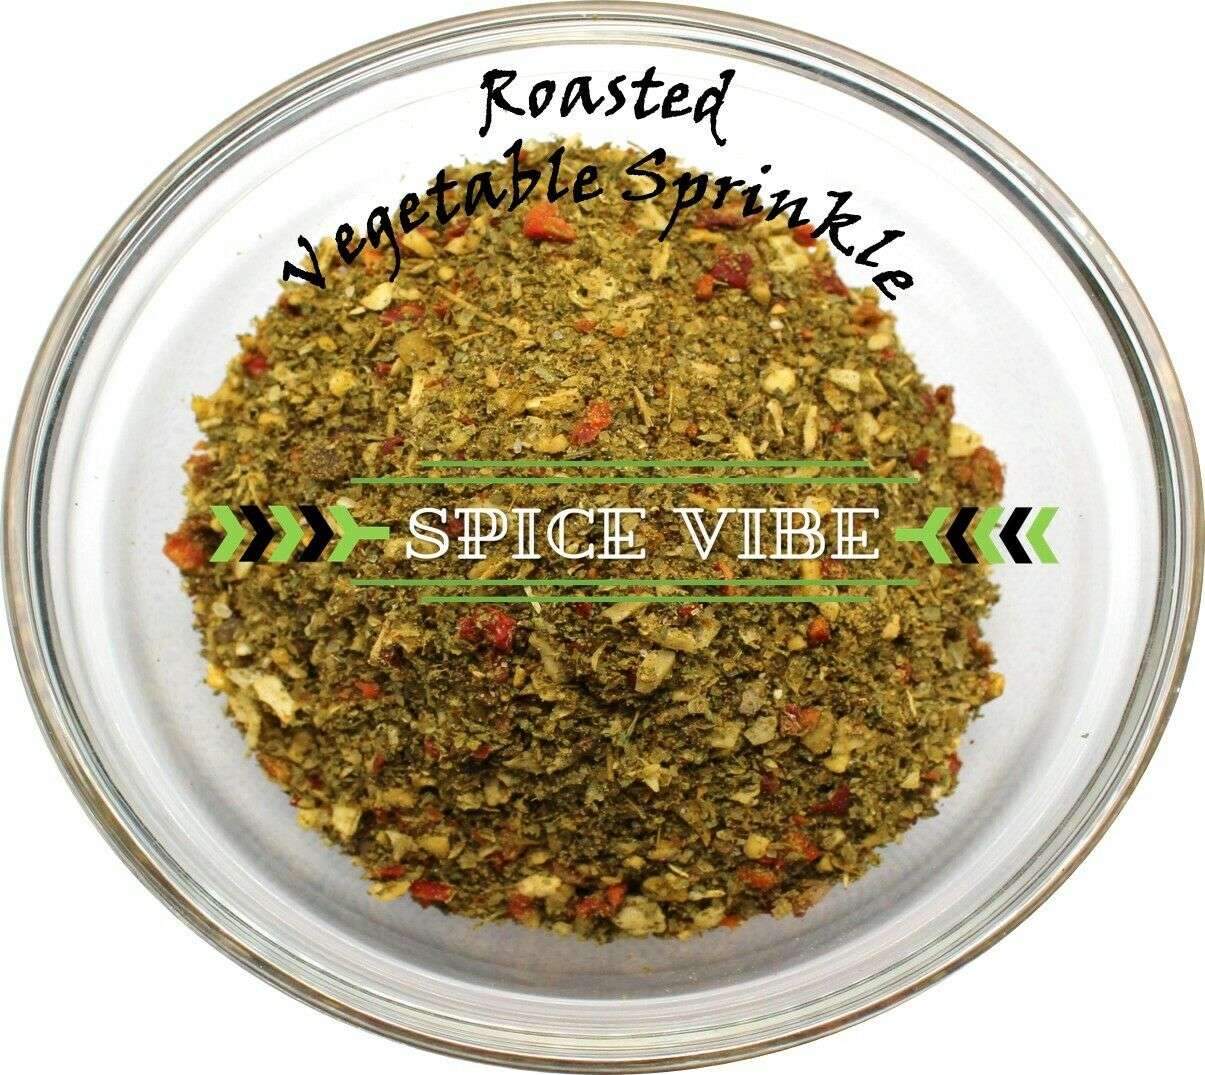 Roasted vegetable spinkle <div><span style="text-decoration: underline"><strong>Spice-O-Mat - 200g</strong></span></div> <div></div> <div><b><u><span style="font-size: medium">Description: </span></u></b></div> <div> <div><span style="font-size: medium">•This Spice-O-Mat seasoning is an aromatic blend that can be added to all your culinary favourites.</span></div> <div><span style="font-size: medium">•Spice-O-Mat is great on any potato dish.  </span></div> <div><span style="font-size: medium">•Use Spice-O-Mat on fried eggs - you will be amazed at the nice taste!</span></div> <div><span style="font-size: medium">•If you like Aromat, then you will be very impressed with this under rated all-purpose seasoning.</span></div> <div></div> <div><b><u><span style="font-size: medium">Ingredients: </span></u></b></div> <div>Salt, MSG (Flavour Enhancer E621), Dehydrated Vegetable (Onion), Dextrose, Maize Flour, Anticaking Agent (E551), Vegetable Oil (Canola Seed), Spice Extract, Yeast Extract.</div> <div><b><u><span style="font-size: medium"> </span></u></b></div> <div><b><u><span style="font-size: medium">Allergens:</span></u></b></div> <div><b>None</b></div> <div><span style="font-size: medium"> </span></div> <div>Spice-O-Mat is produced in a factory where Cow's Milk, Egg, Mustard, Soy, Wheat Gluten are used.</div> </div> <div></div>